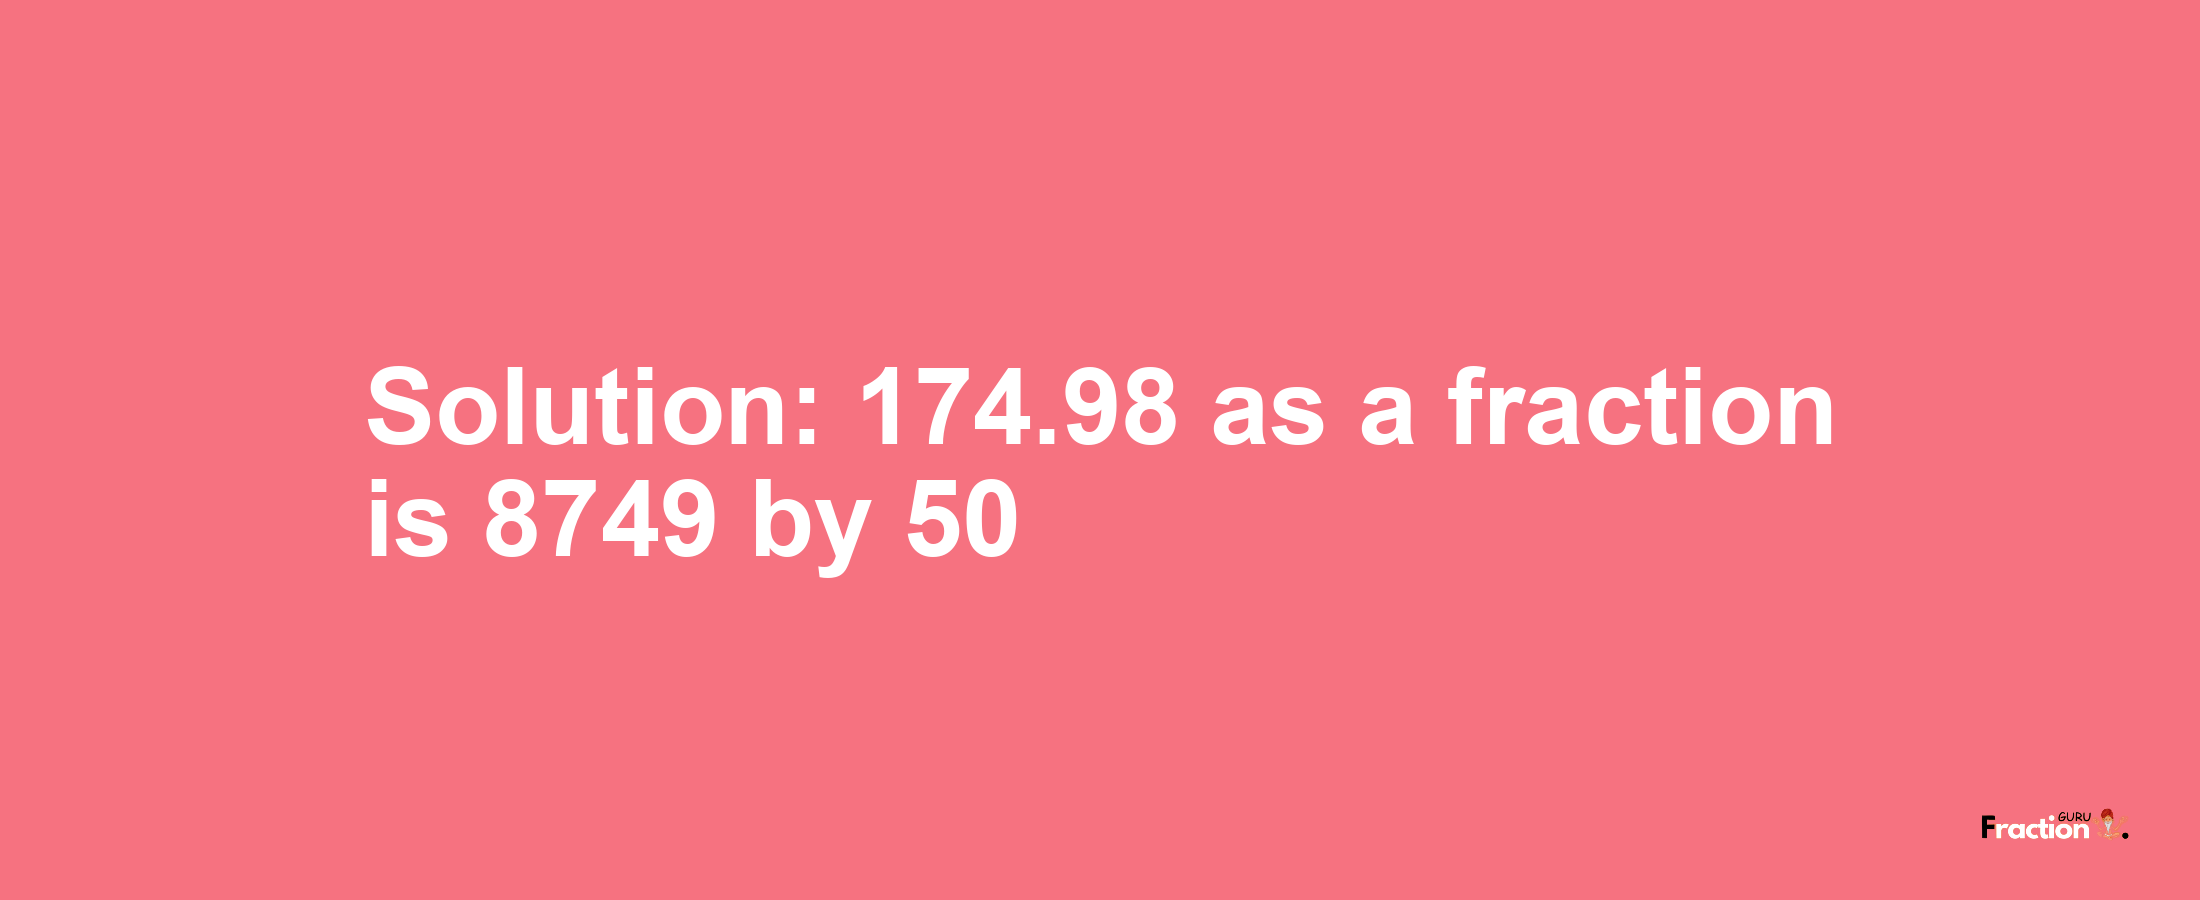 Solution:174.98 as a fraction is 8749/50